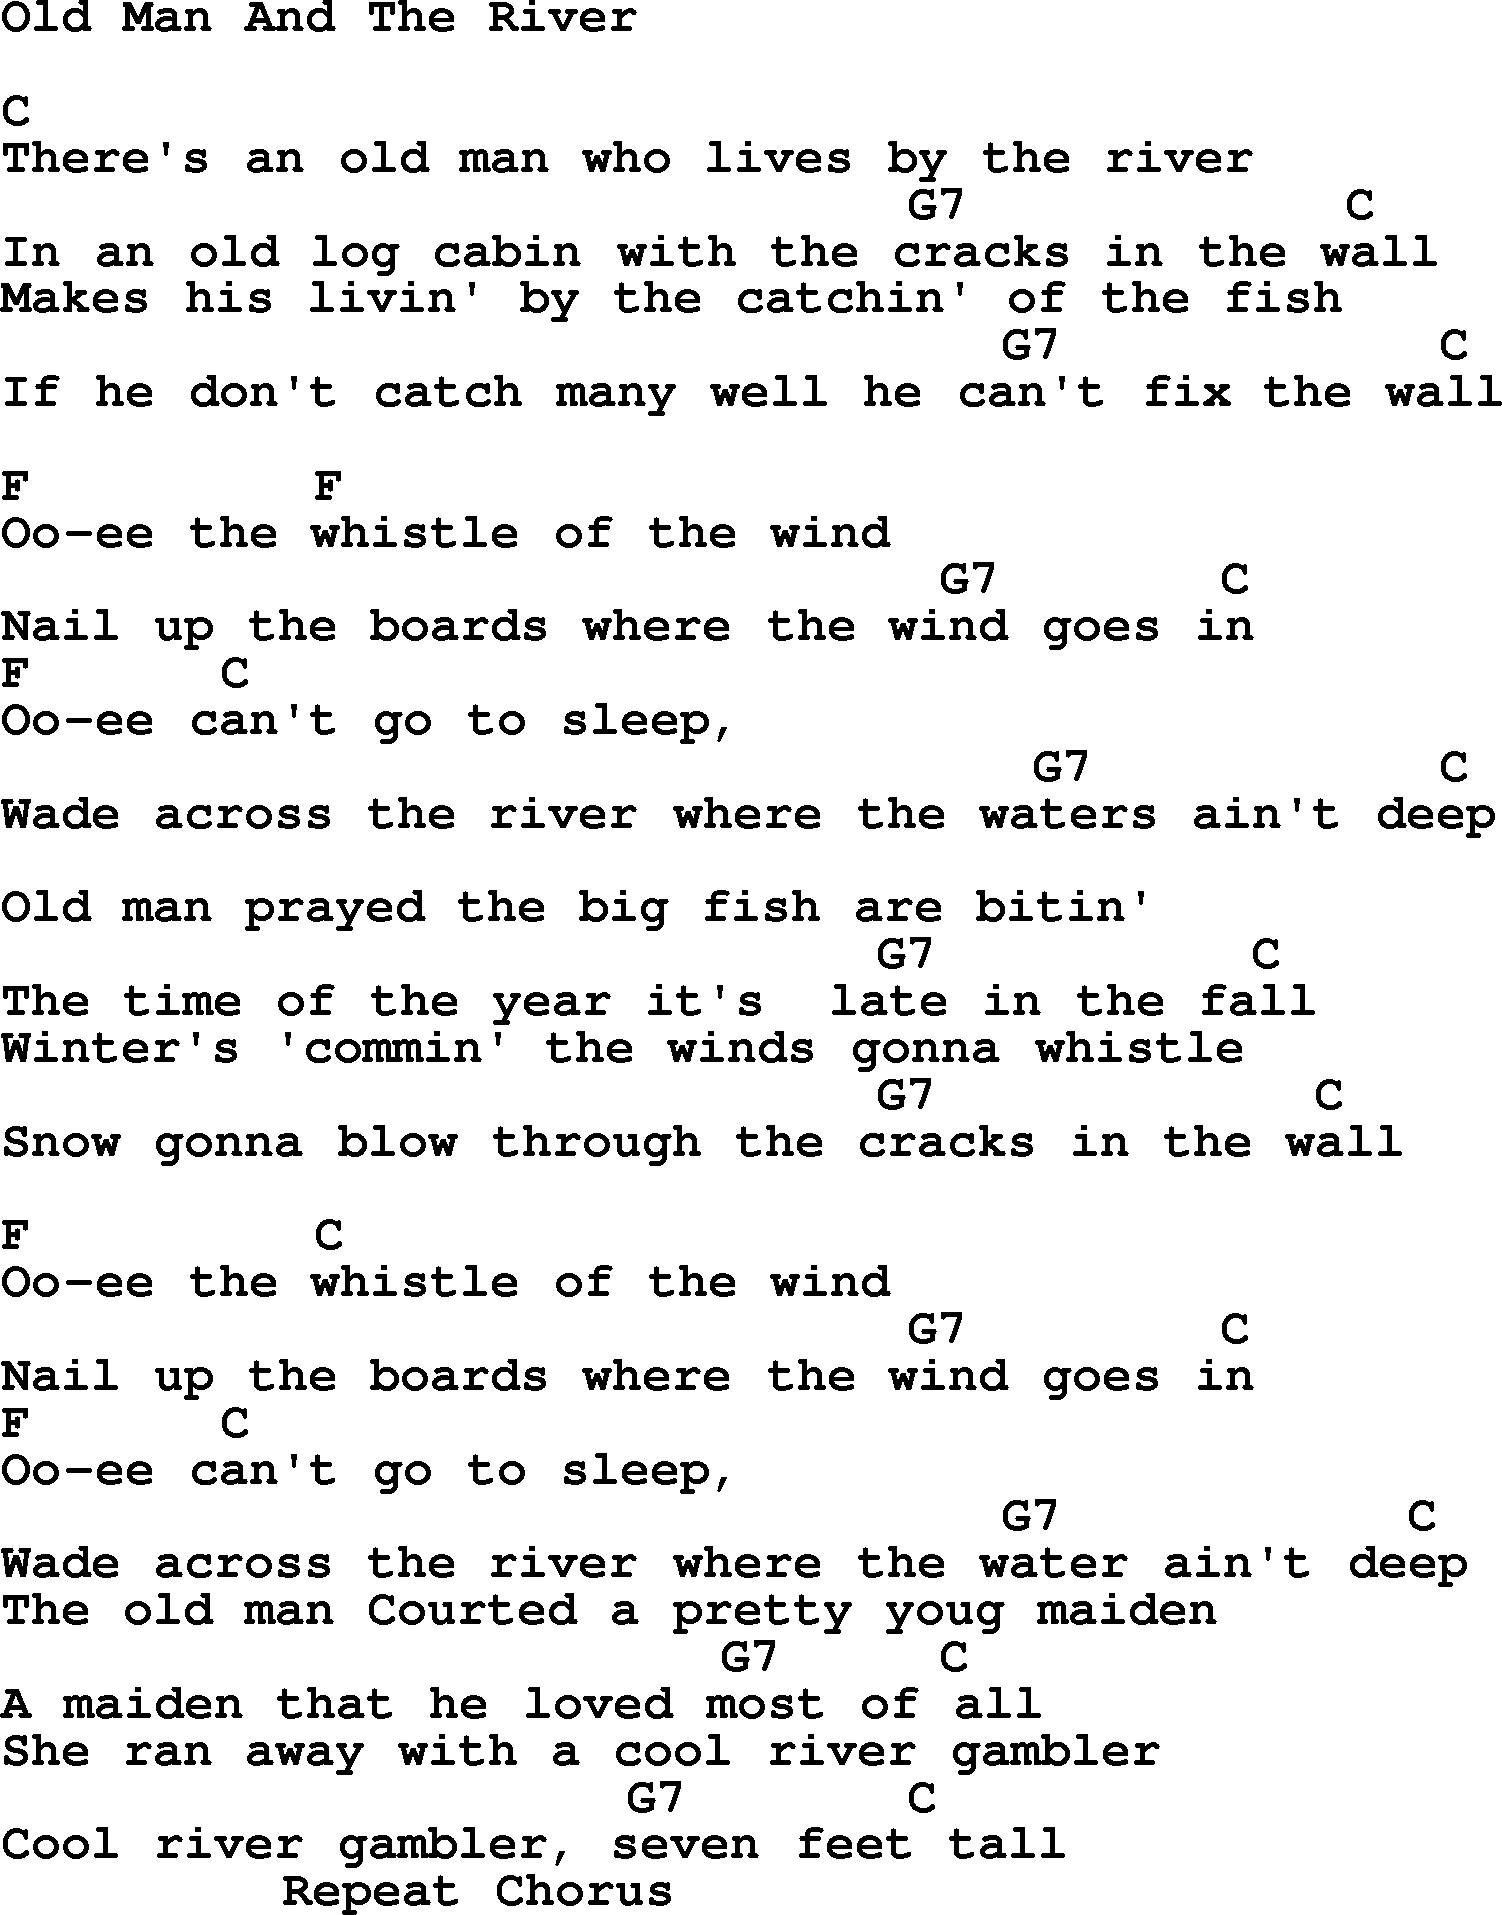 Hank Williams song Old Man And The River, lyrics and chords